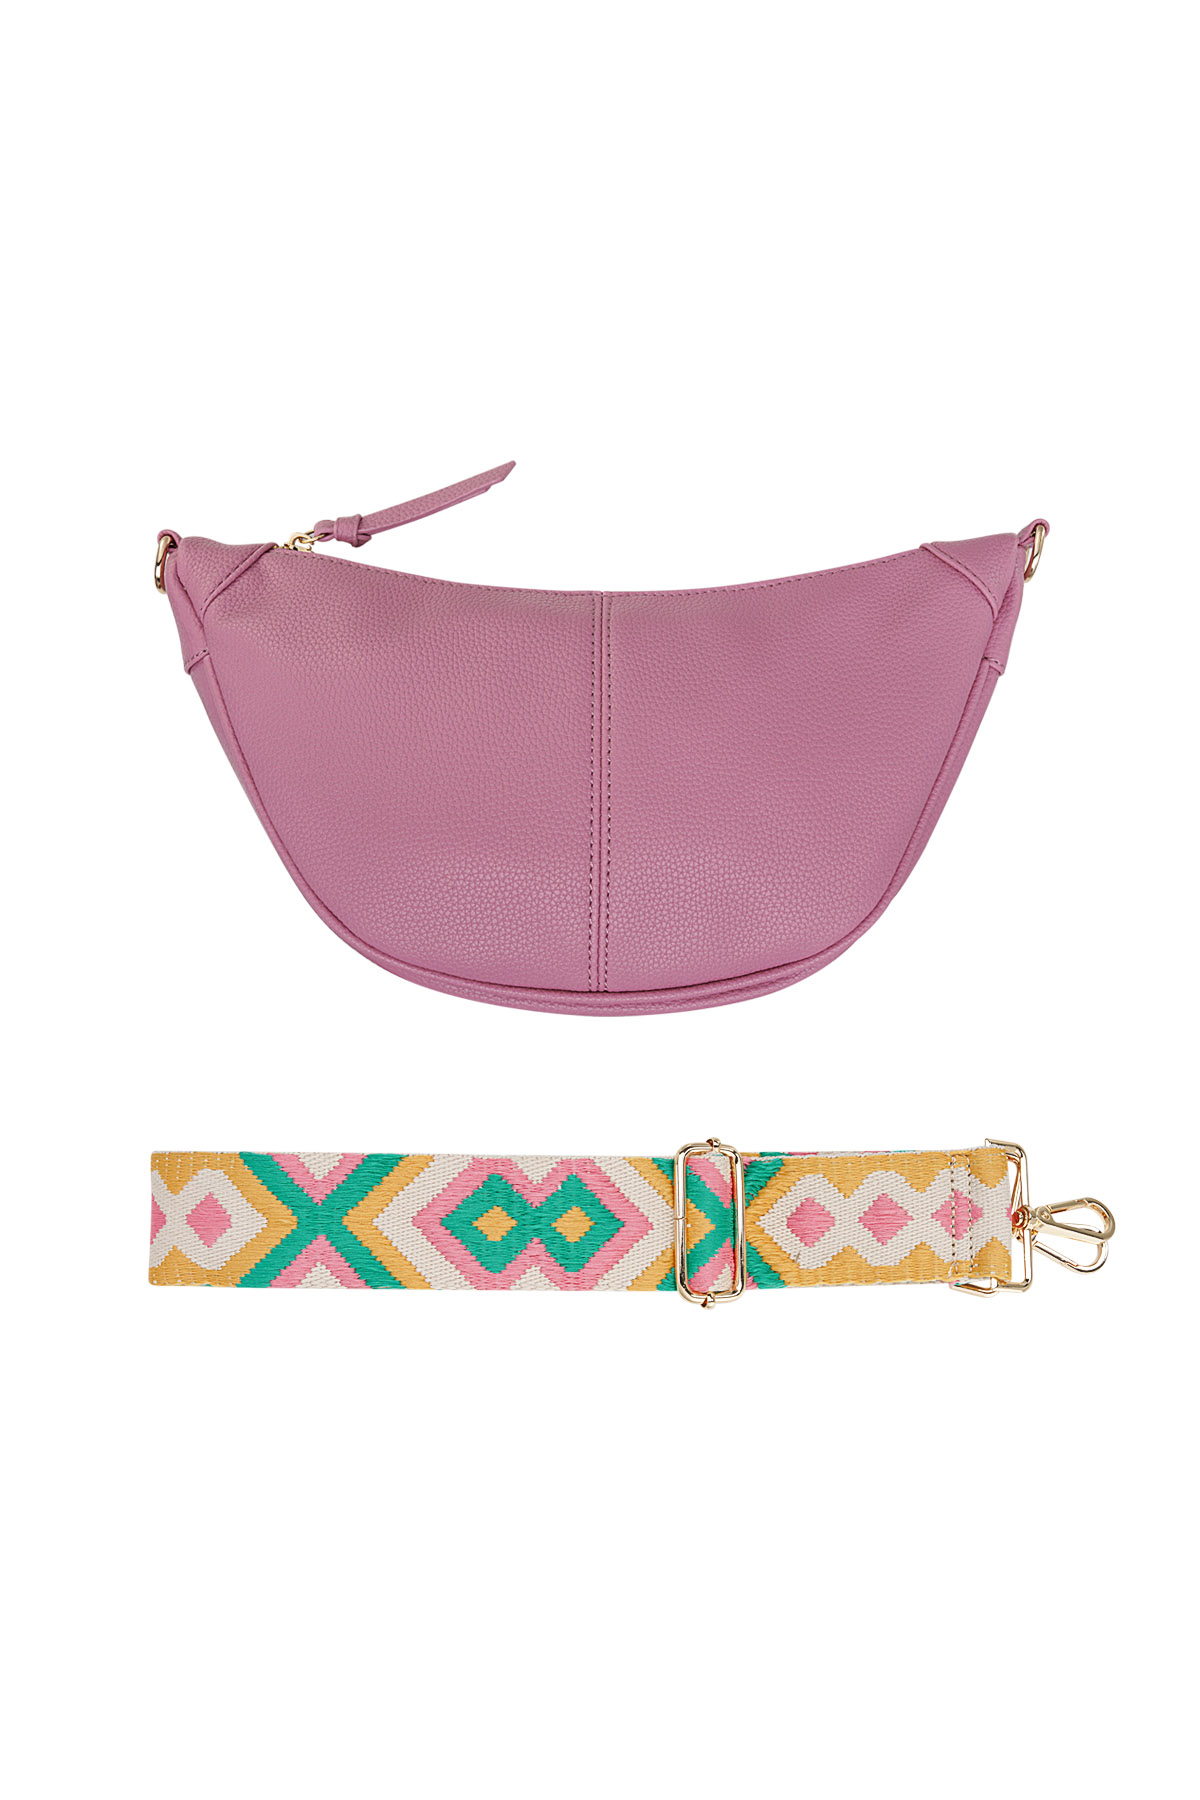 Pouch bag with summer strap - pink